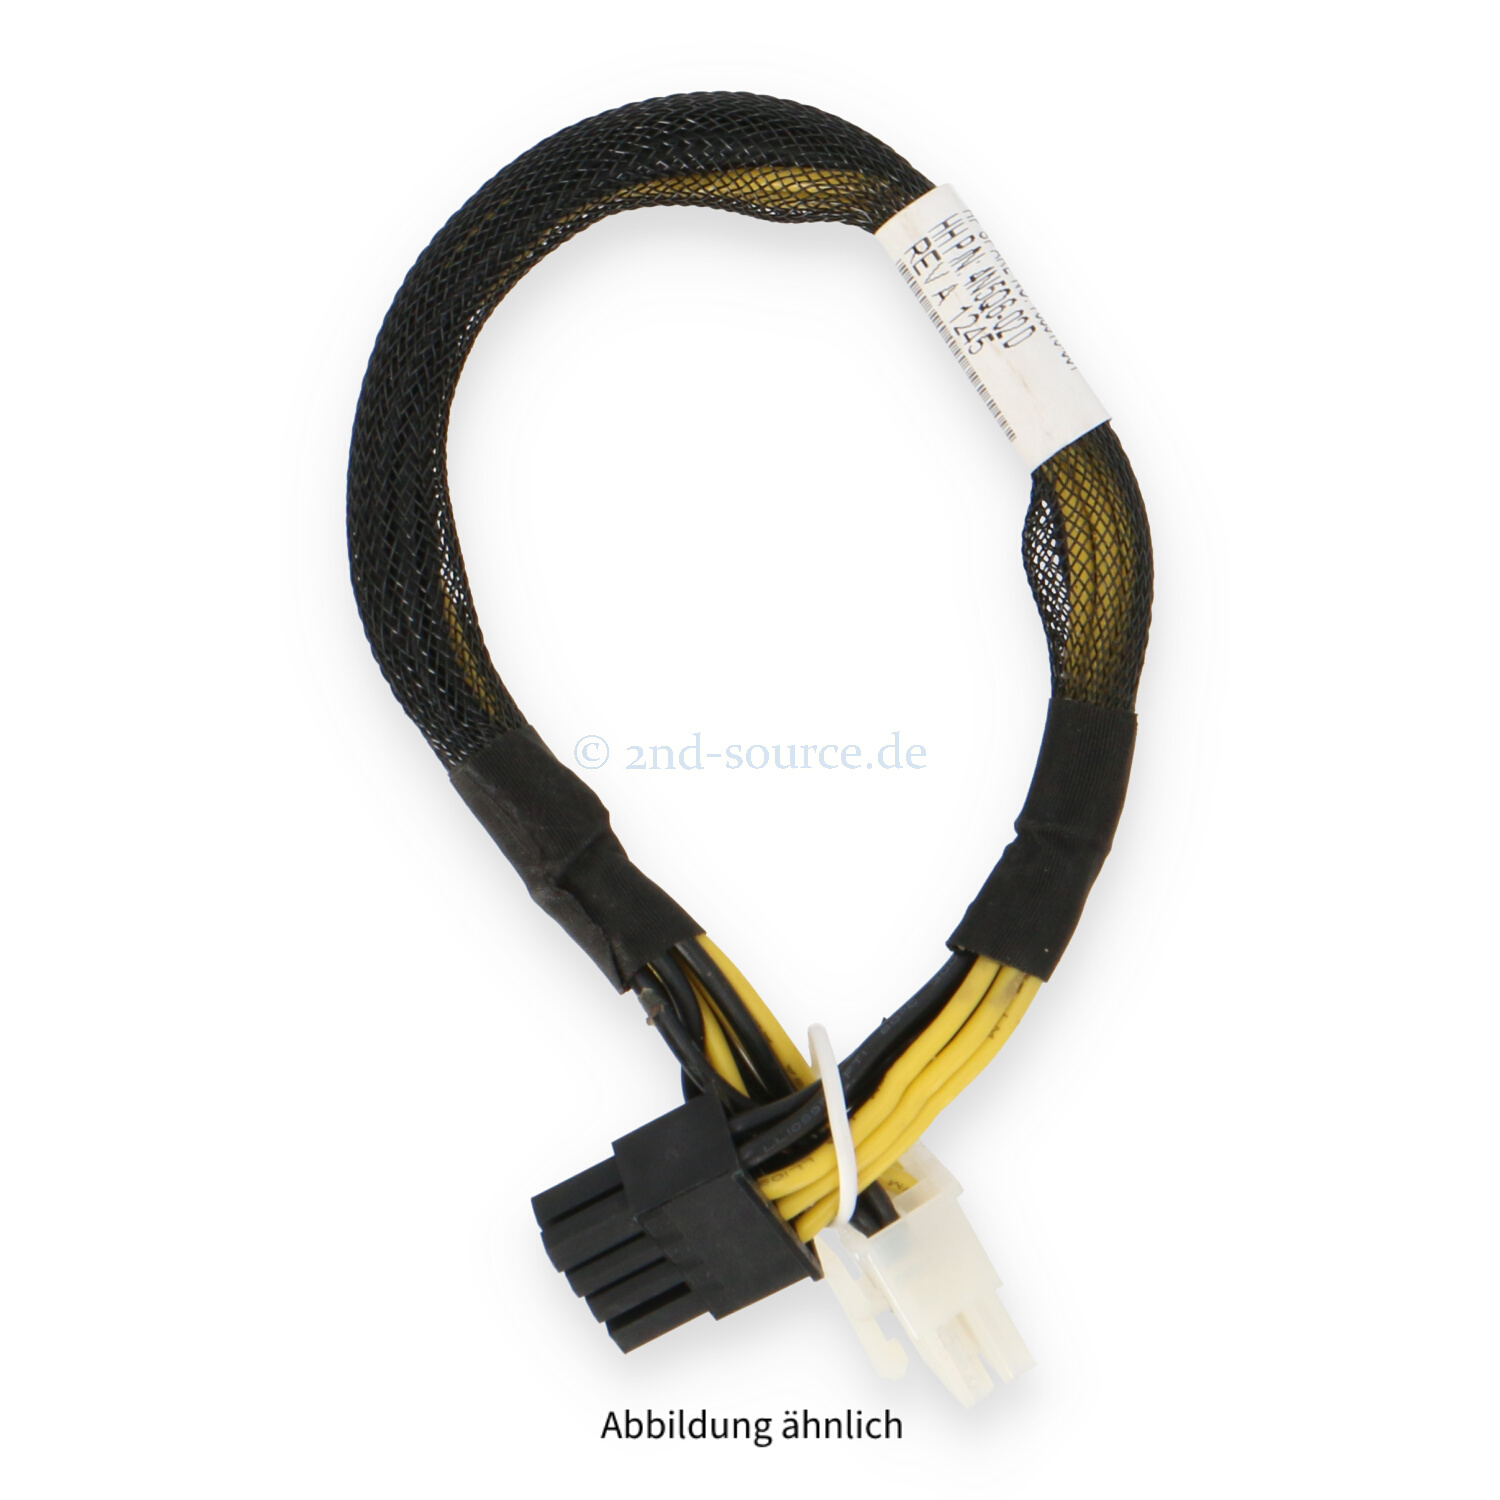 HPE 0.25m 2x 8-PIN CC-7710 Graphics Processing Unit Power Cable SL250s G8 708915-001